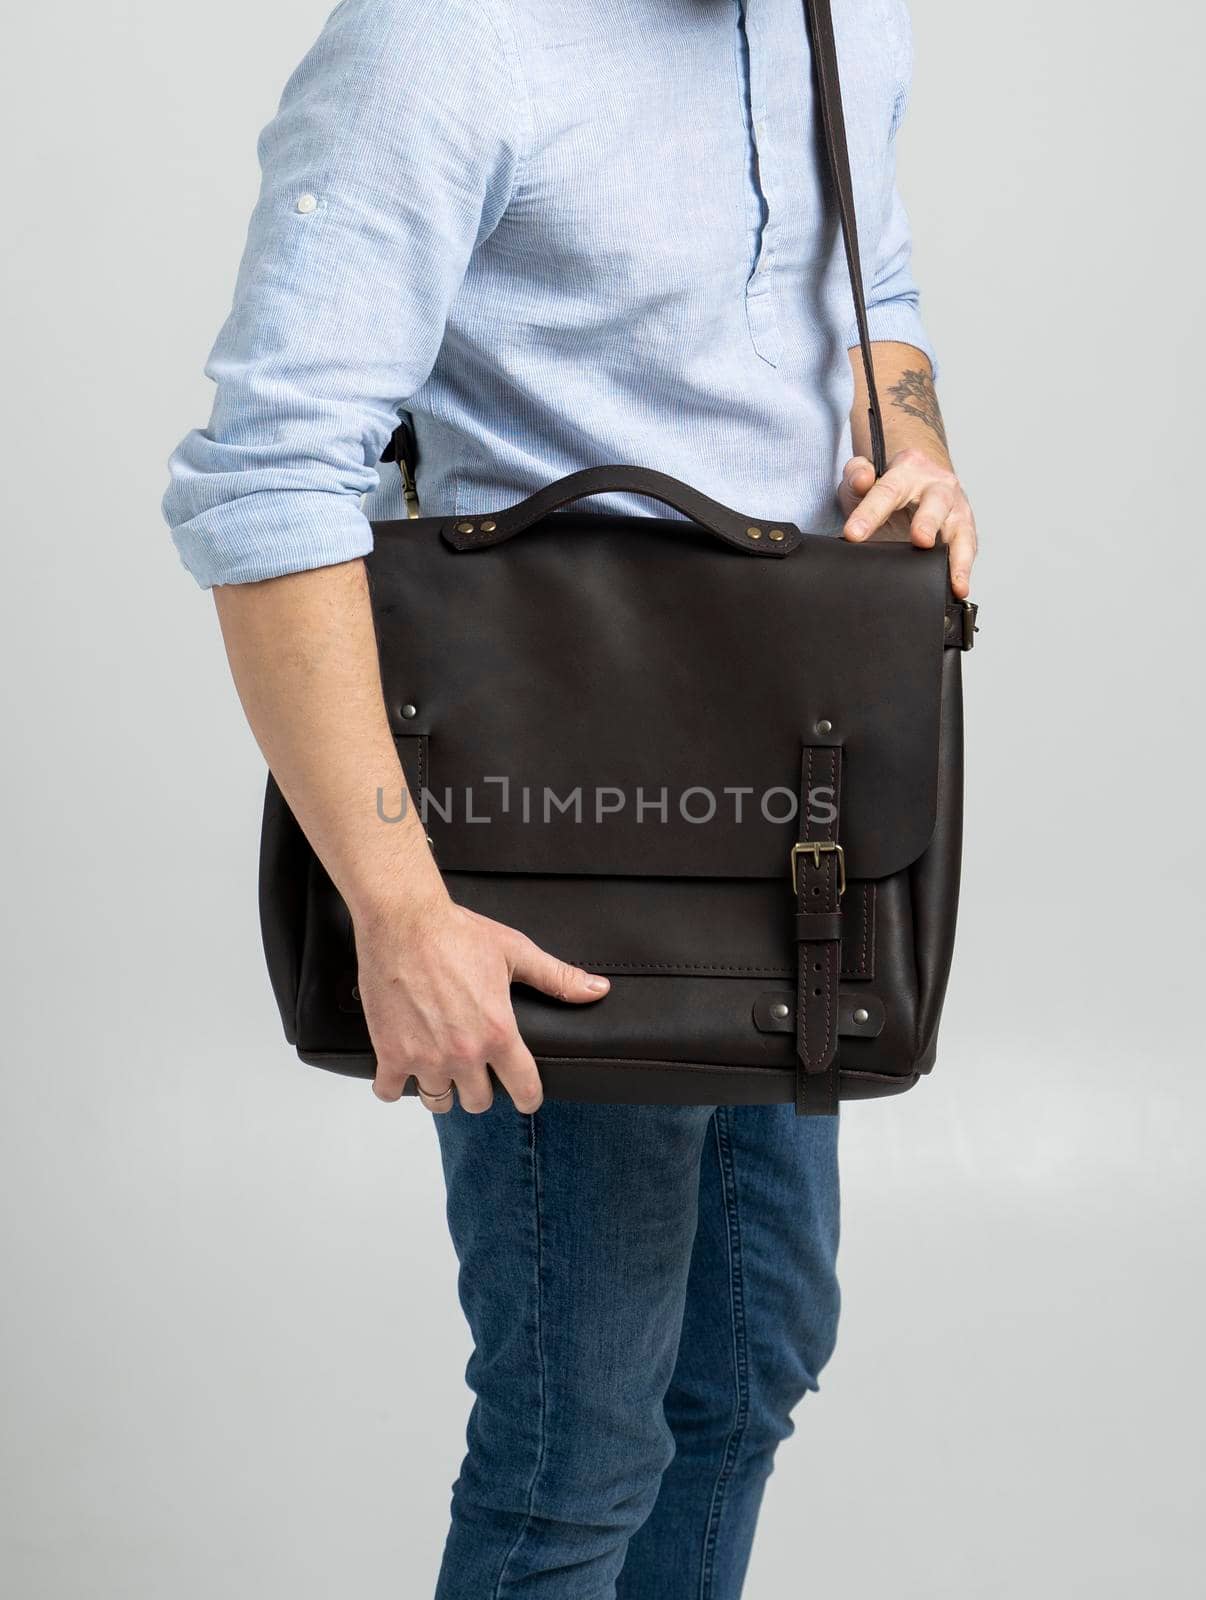 Brown men's shoulder leather bag for a documents and laptop on the shoulders of a man in a blue shirt and jeans with a white background. Satchel, mens leather handmade briefcase